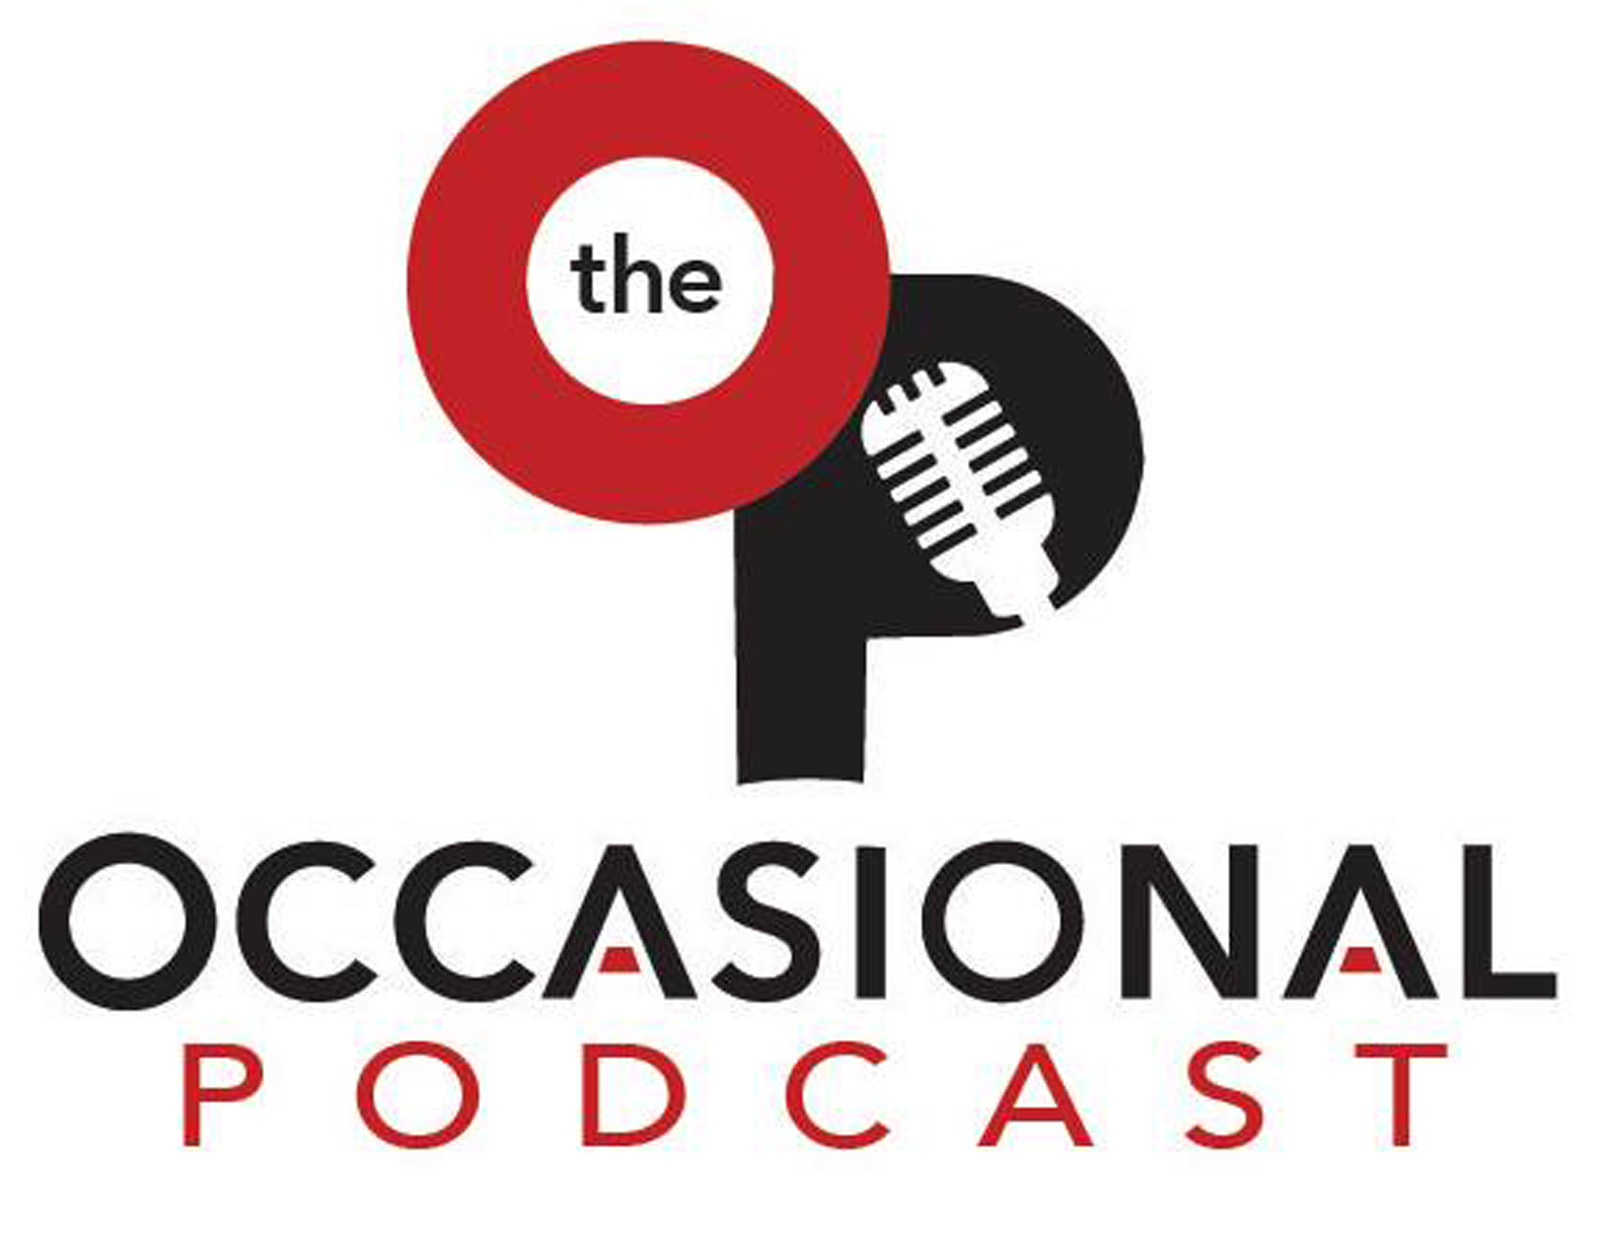 The Occasional Podcast Logo